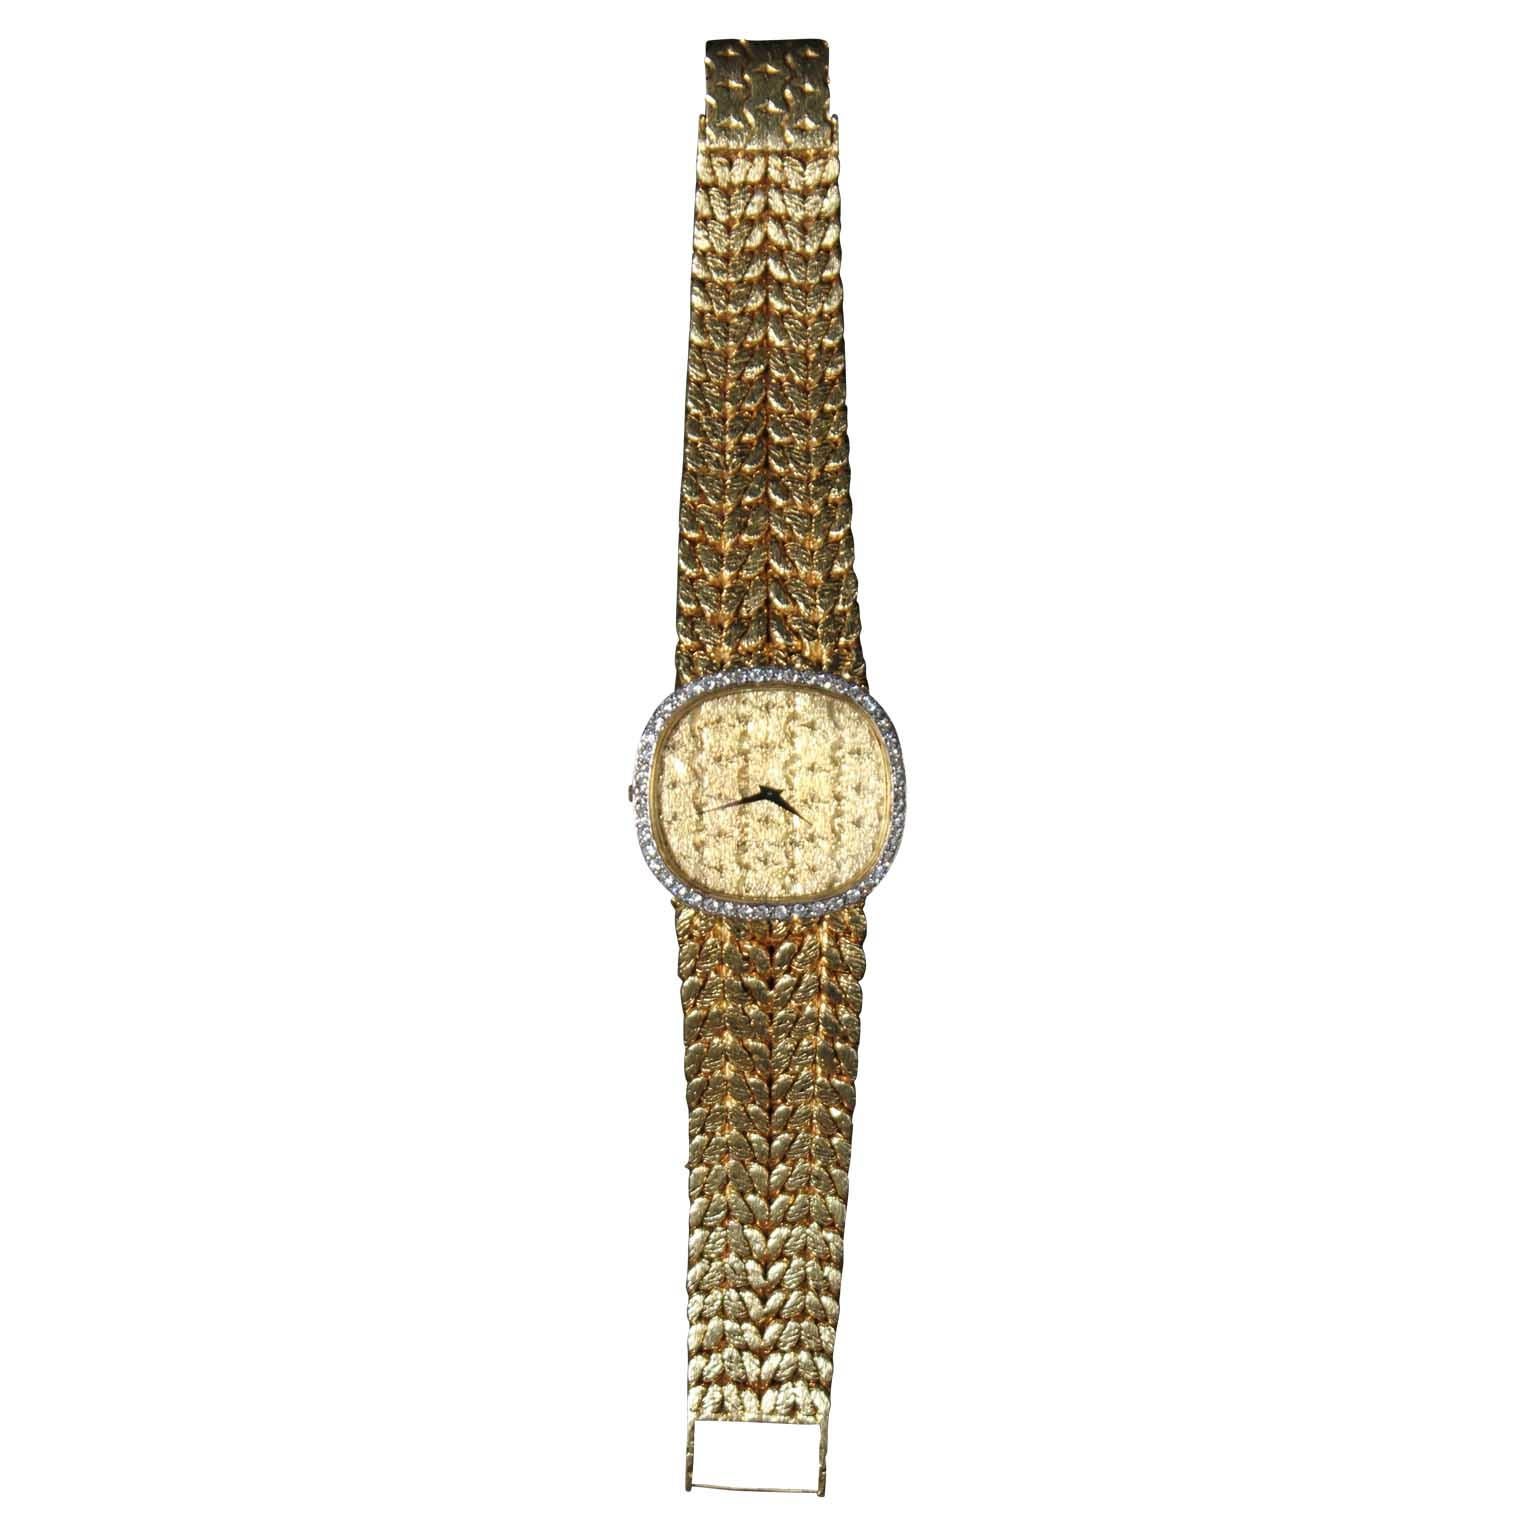 138 gram watch made by the jeweler Bueche-Girod (1948-1980). The watch has the original diamond bezel. Watch was manufactured between 1960s-1970s.
Dimensions: Face width 1.5 in. x band width 1 in. x watch length 8.75 in.
 